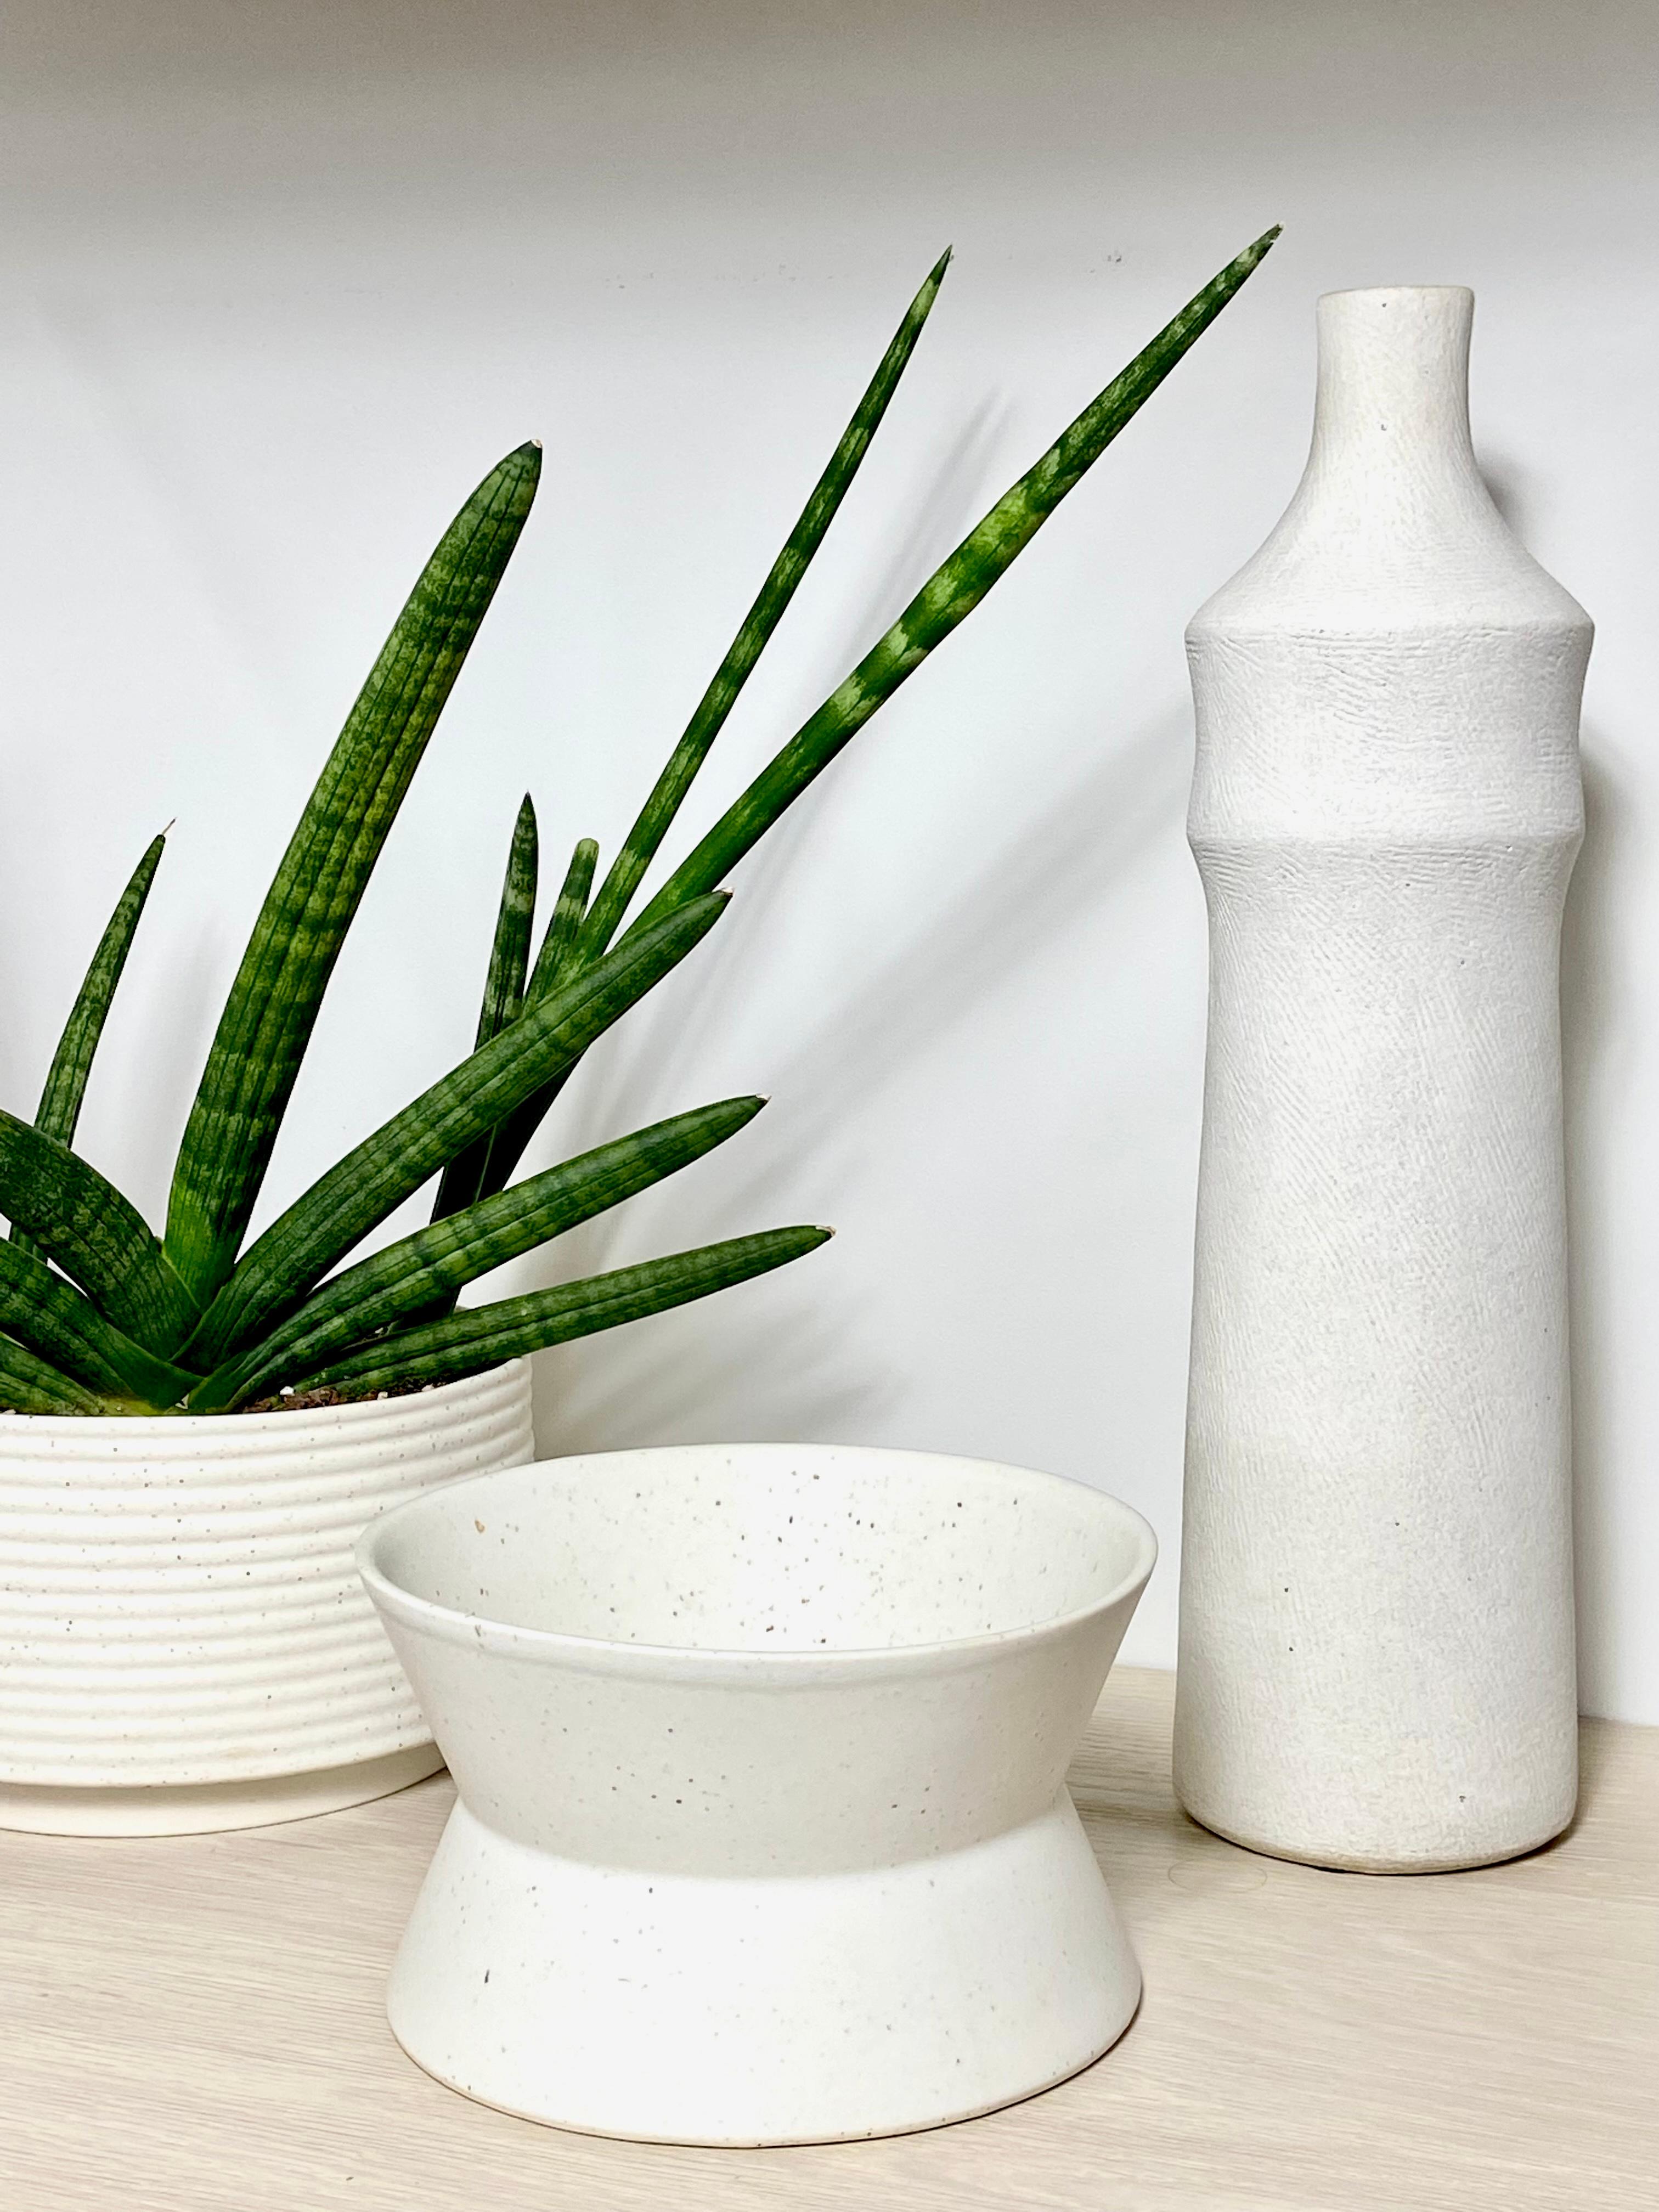 A speckled porcelain vase in a zig zag shape by Hudson Valley ceramic artist Andrew Molleur. It's an architectural form translated into a functional object. This hand-made bowl has a simple yet distinctive shape and is great for every day use,